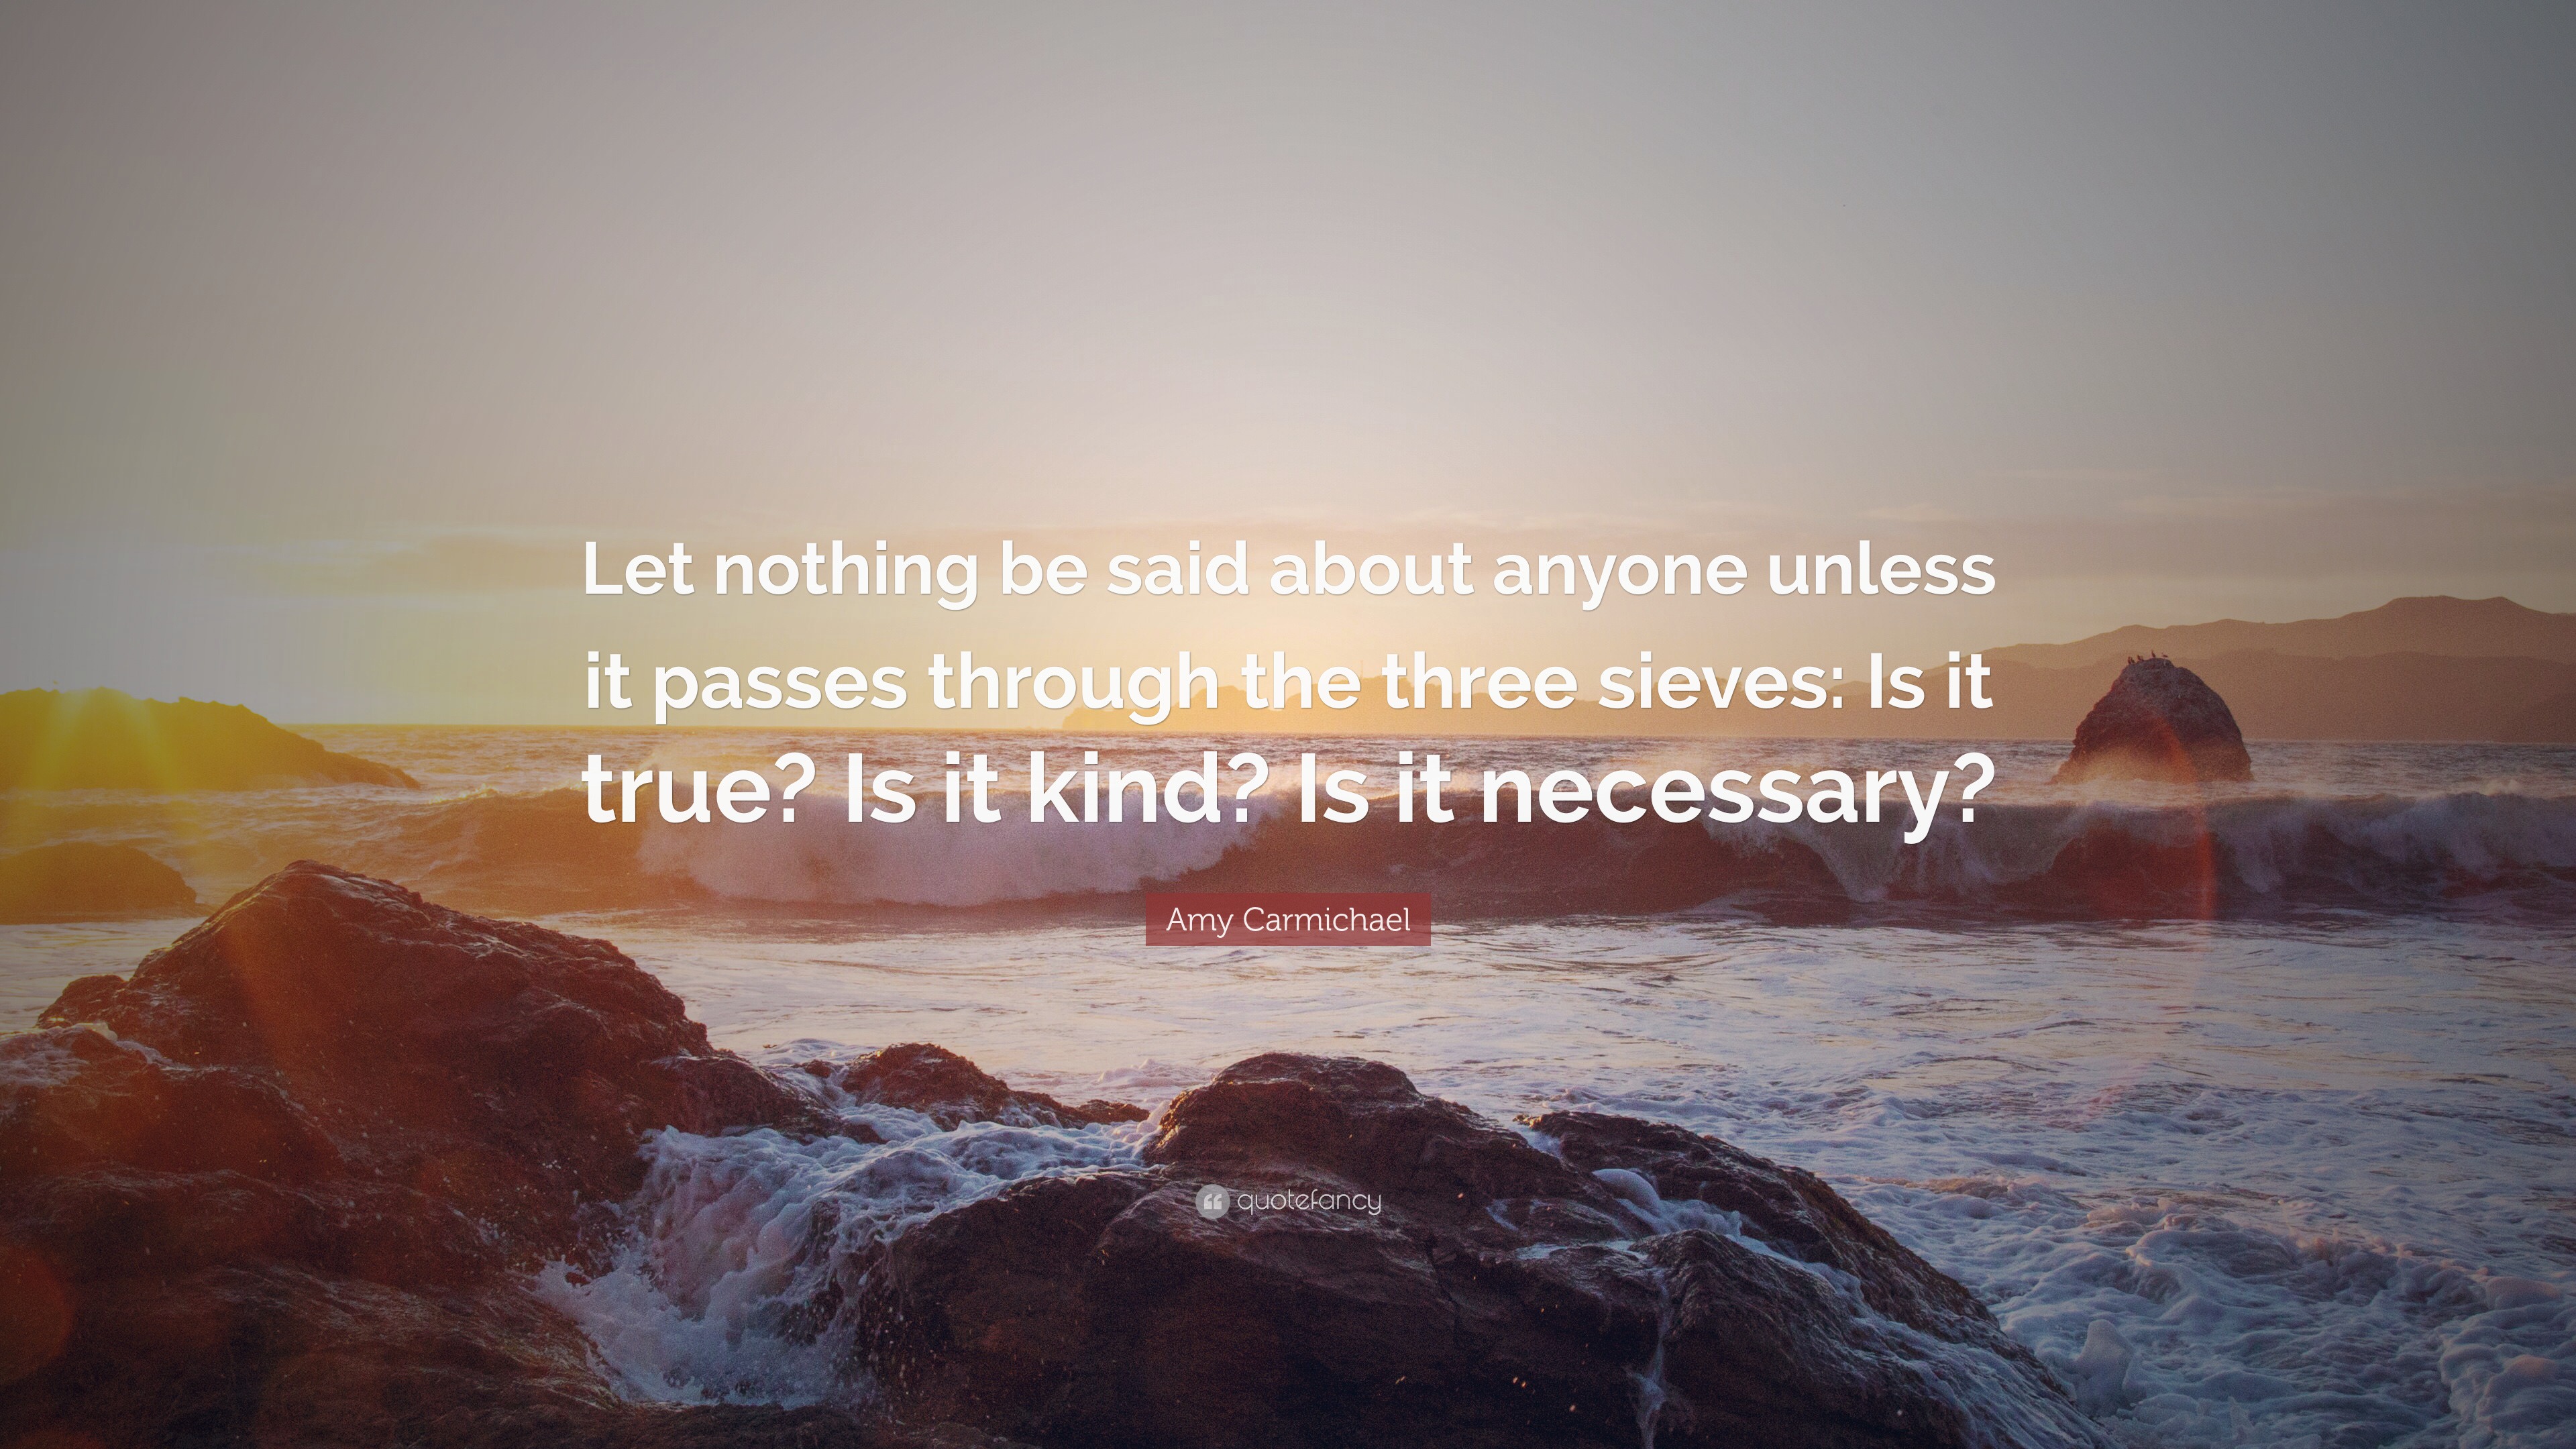 Amy Carmichael Quote: “Let nothing be said about anyone unless it ...